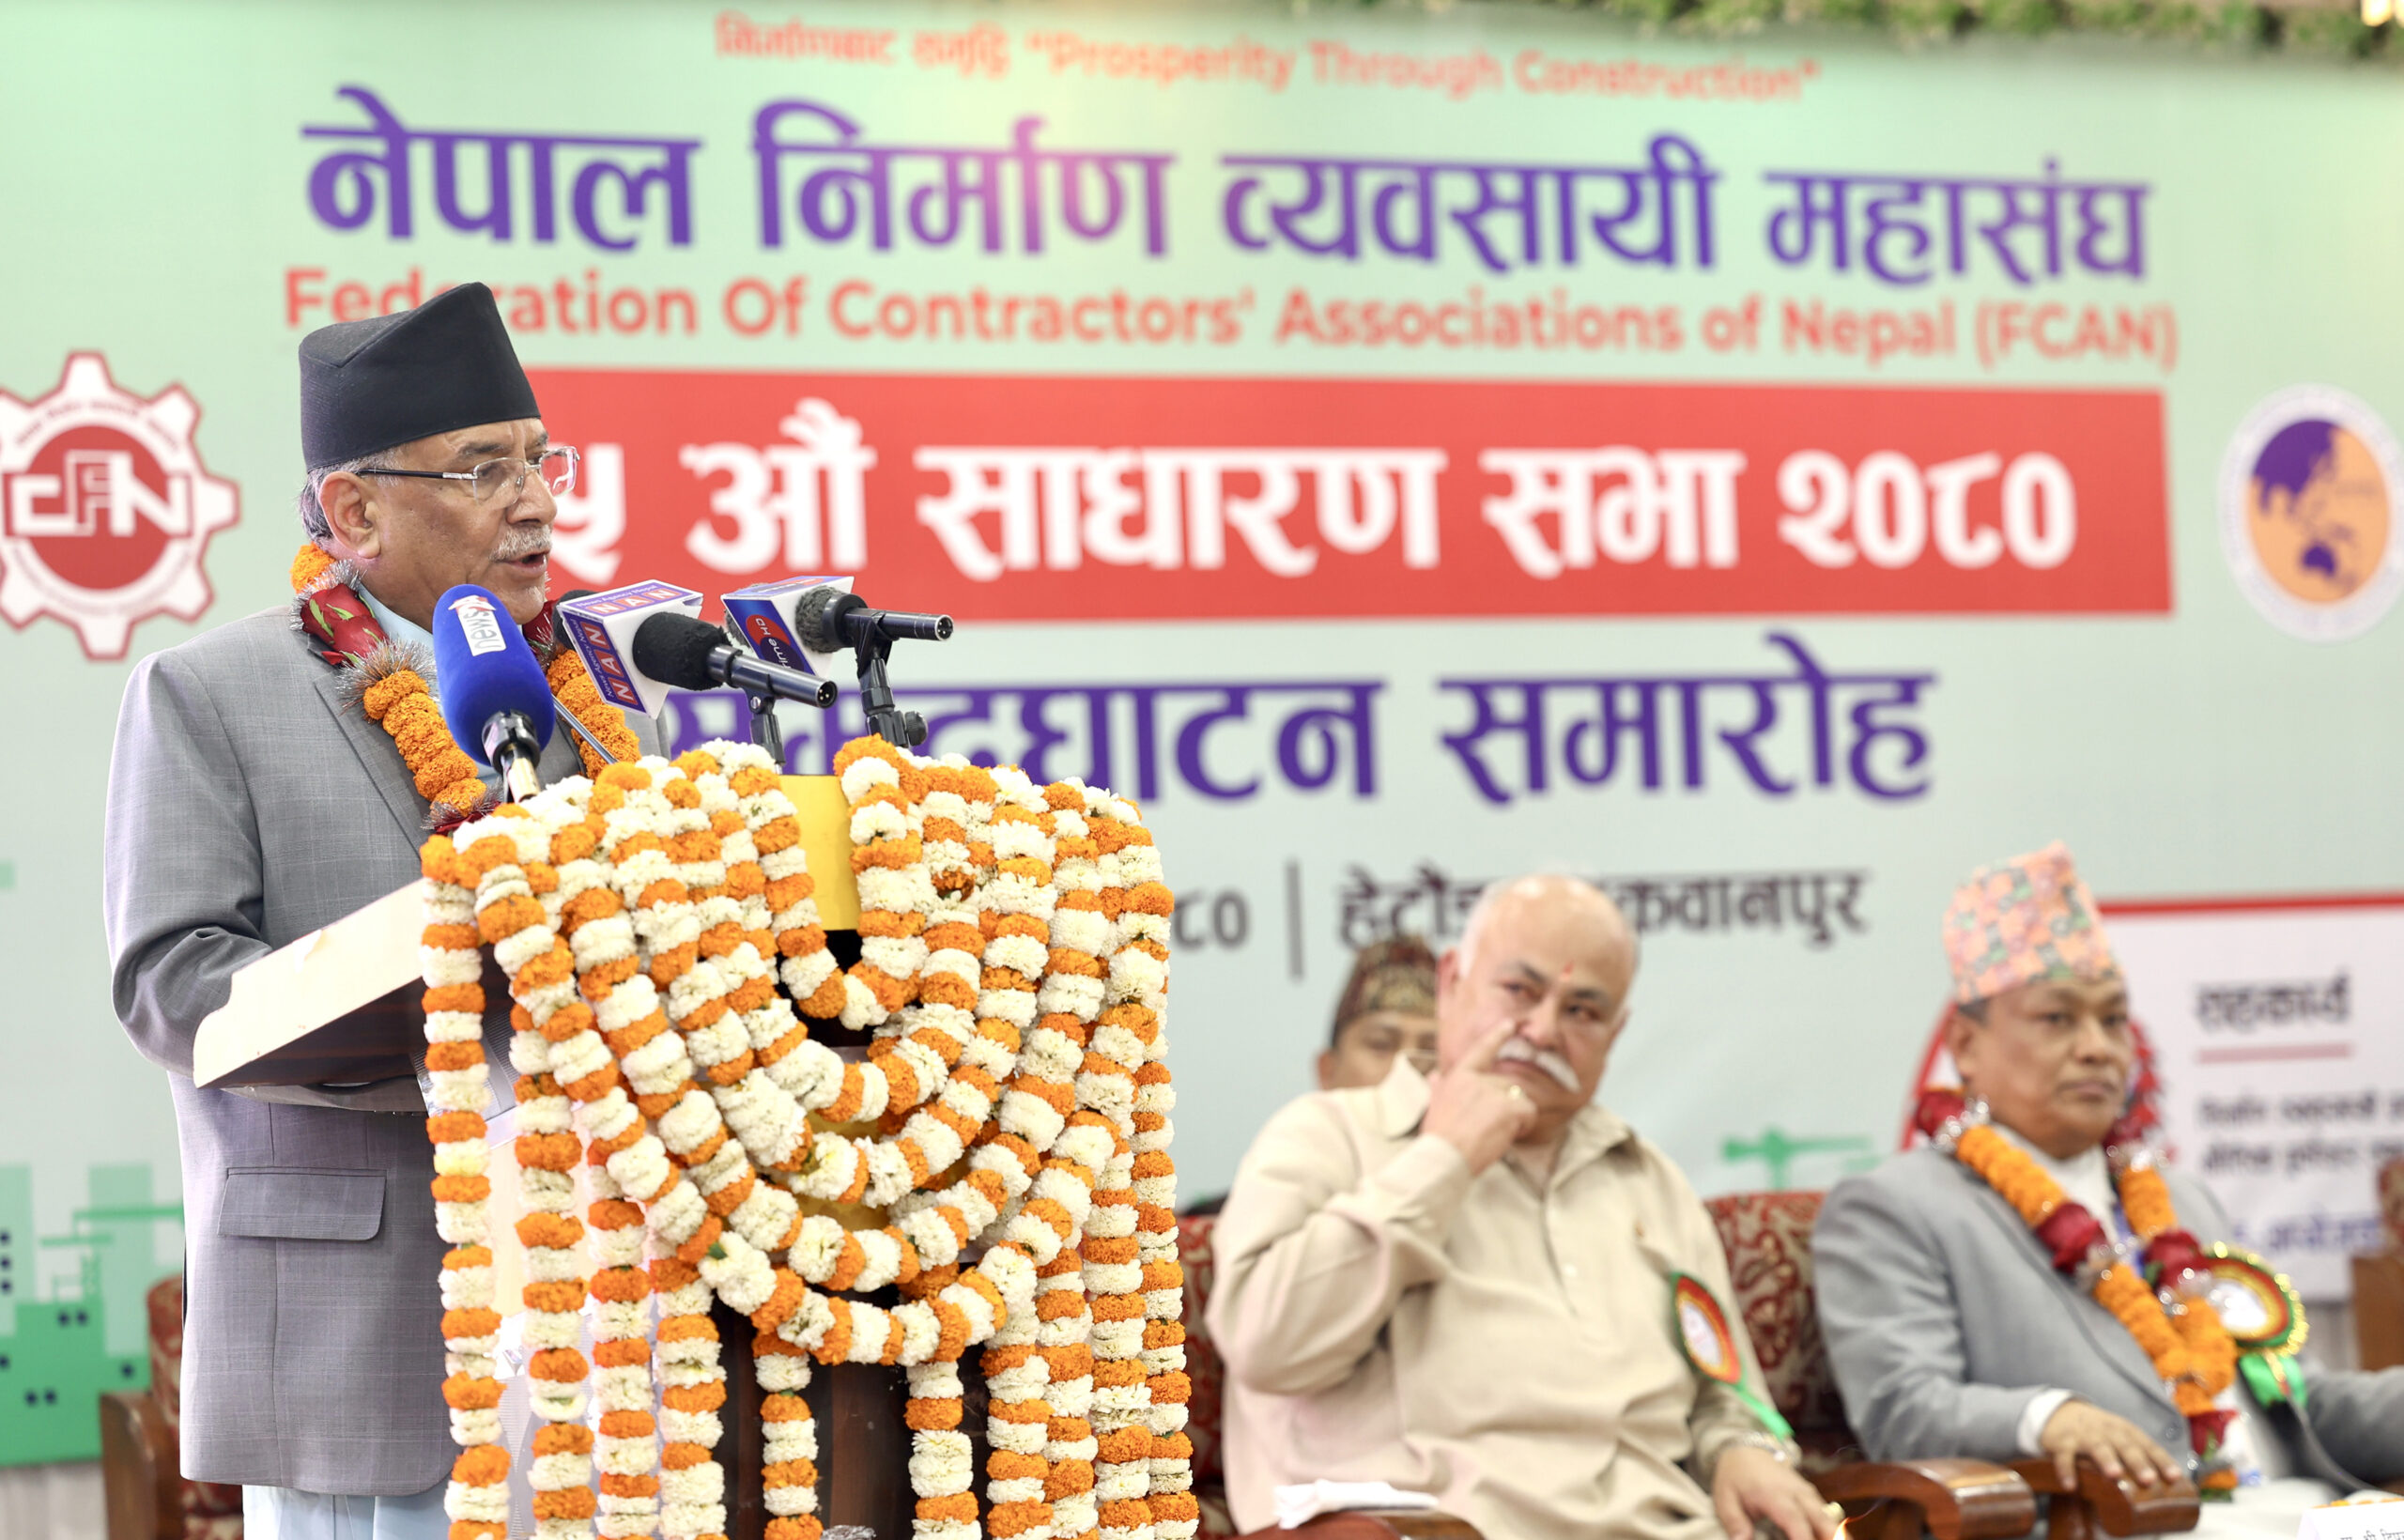 Additional liability added to State due to lack of quality work: PM Dahal